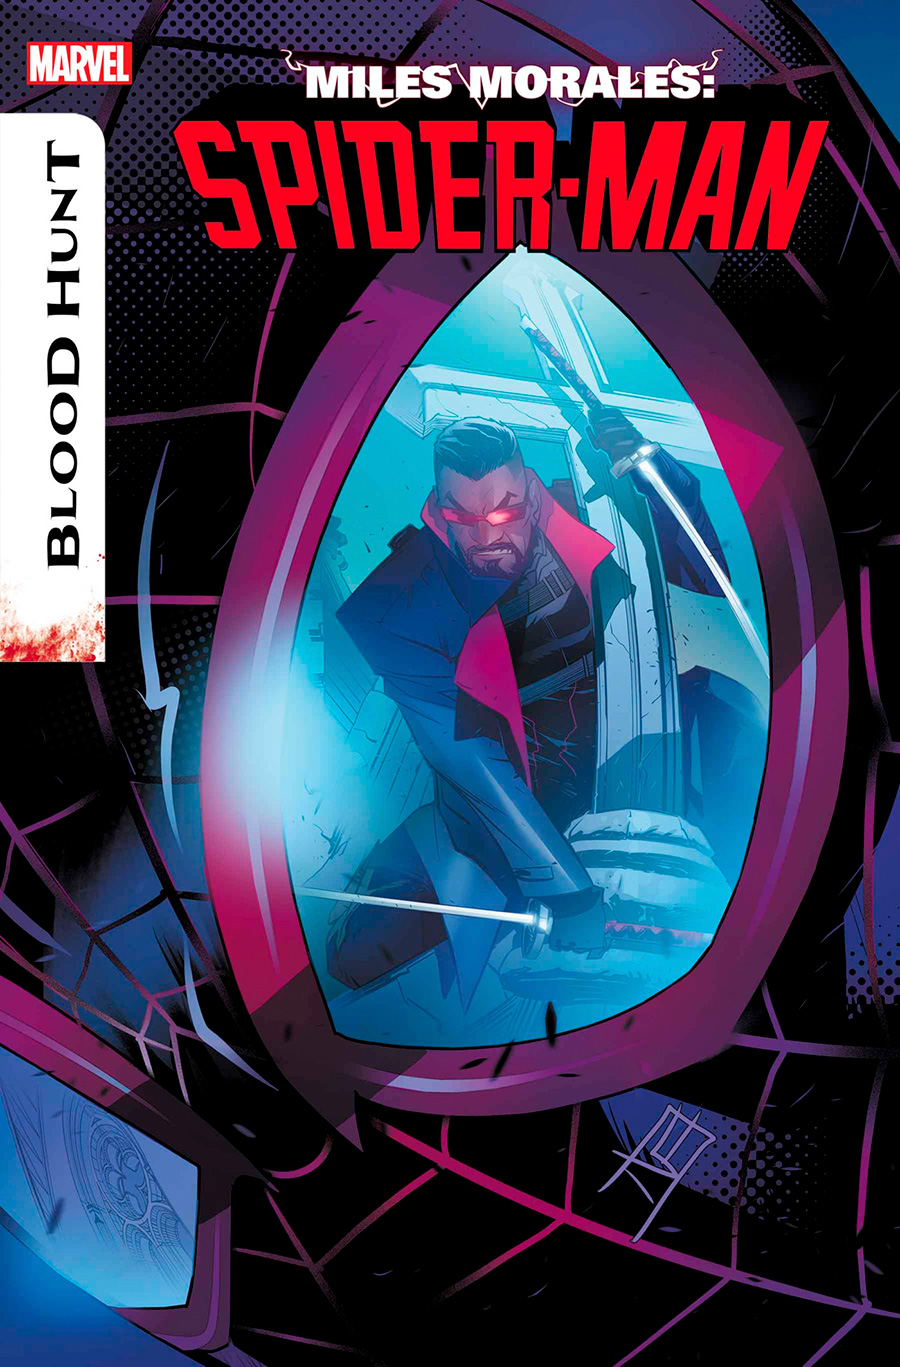 Miles Morales Spider-Man Vol 2 #21 Cover A Regular Federico Vicentini Cover (Blood Hunt Tie-In)